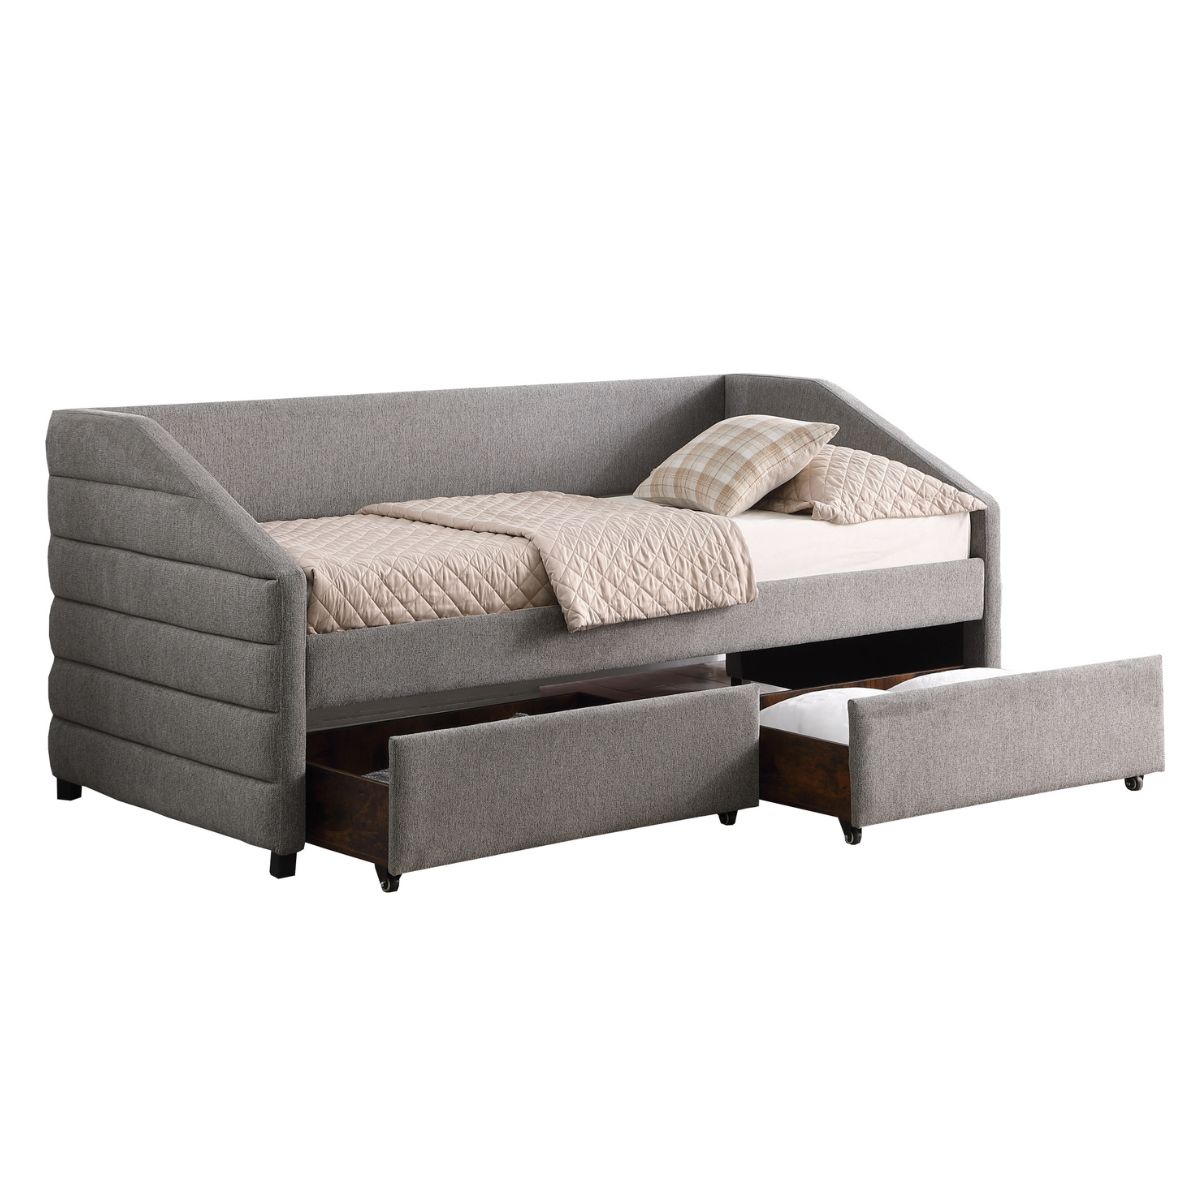 Baku Upholstered Day Bed with Storage Grey - 1